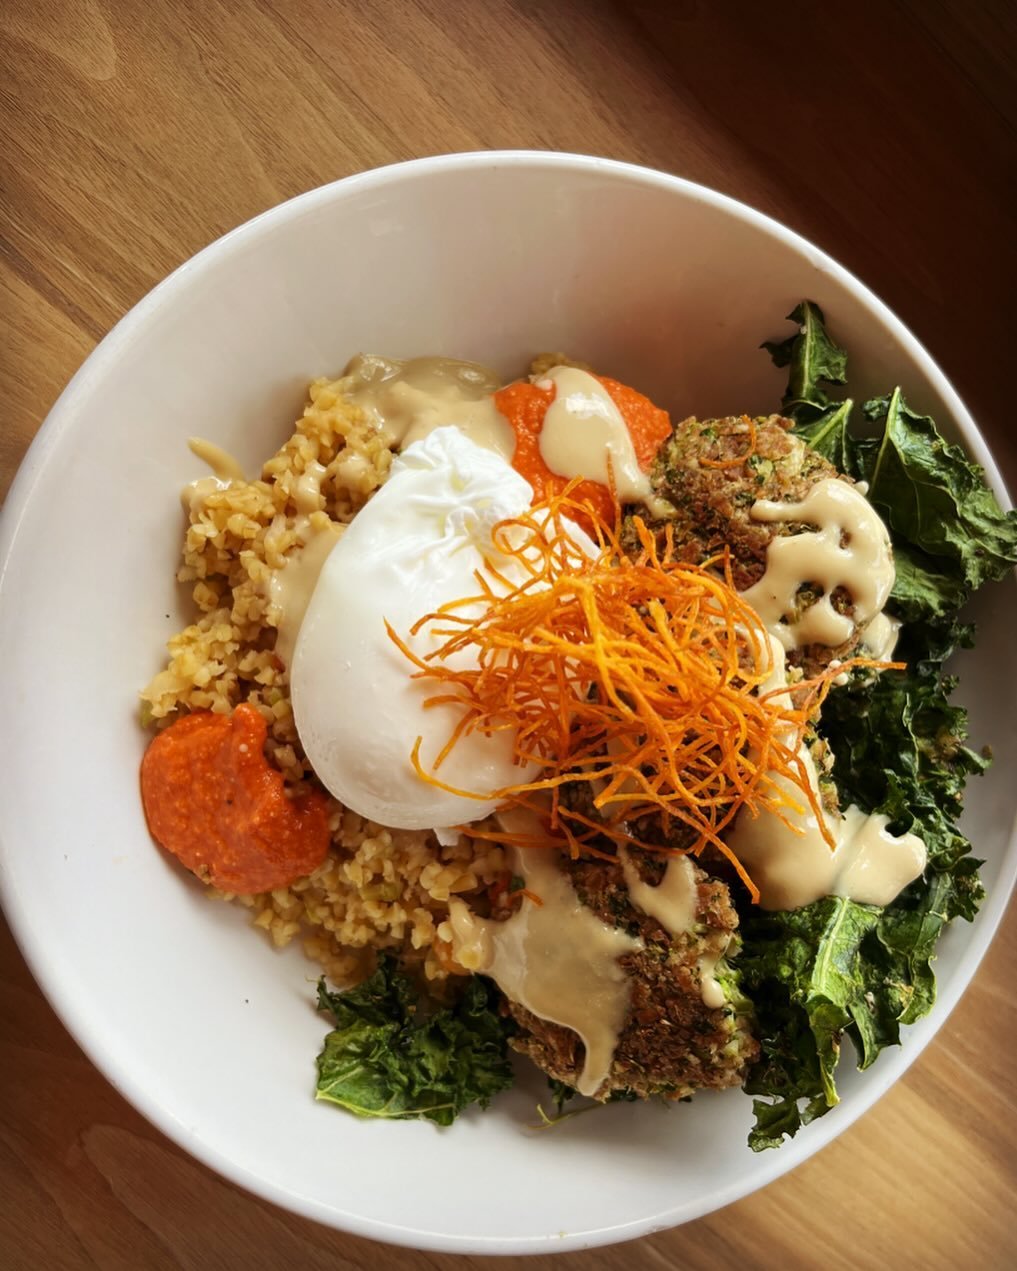 Just in time for summer, we&rsquo;ve got some tasty new menu items! Don&rsquo;t forget to make your reso for this weekend, it&rsquo;s going to be a busy one!

#grainbowl #bulgar #seitan #mapletahini #veggiefood #eatyourveggies #goodfood #summerbody #